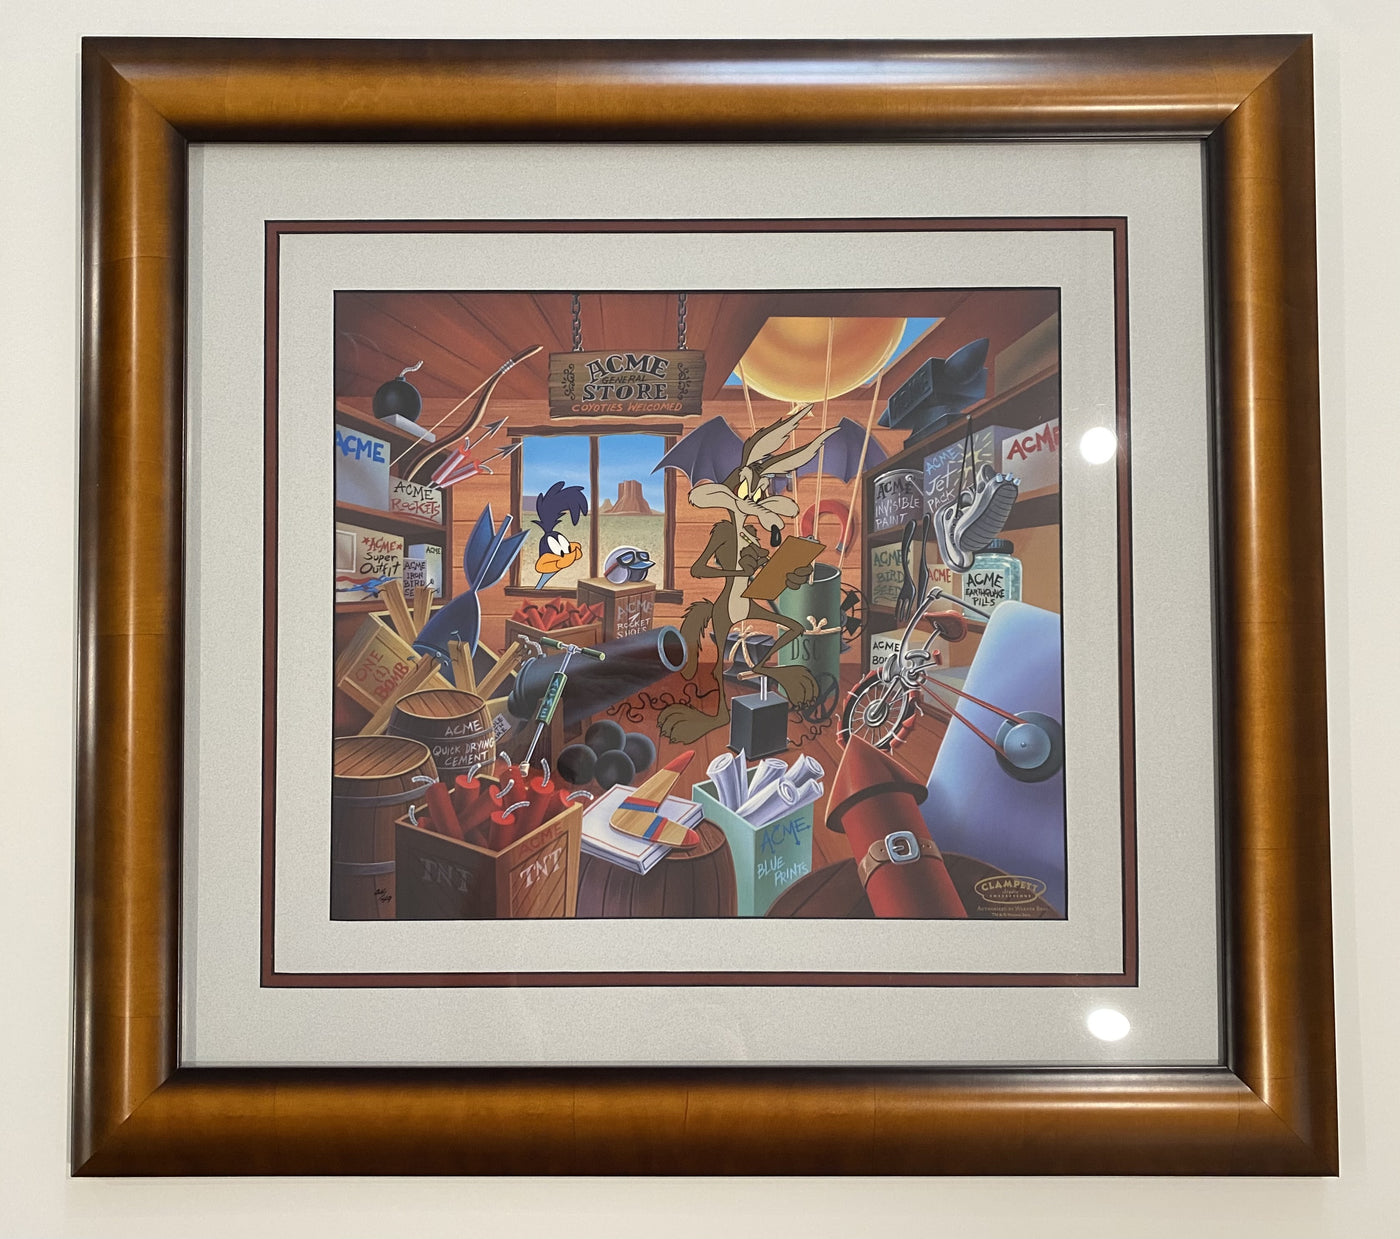 Warner Brothers "Acme General Store" Limited Edition Cel featuring Wile E. Coyote and Road Runner